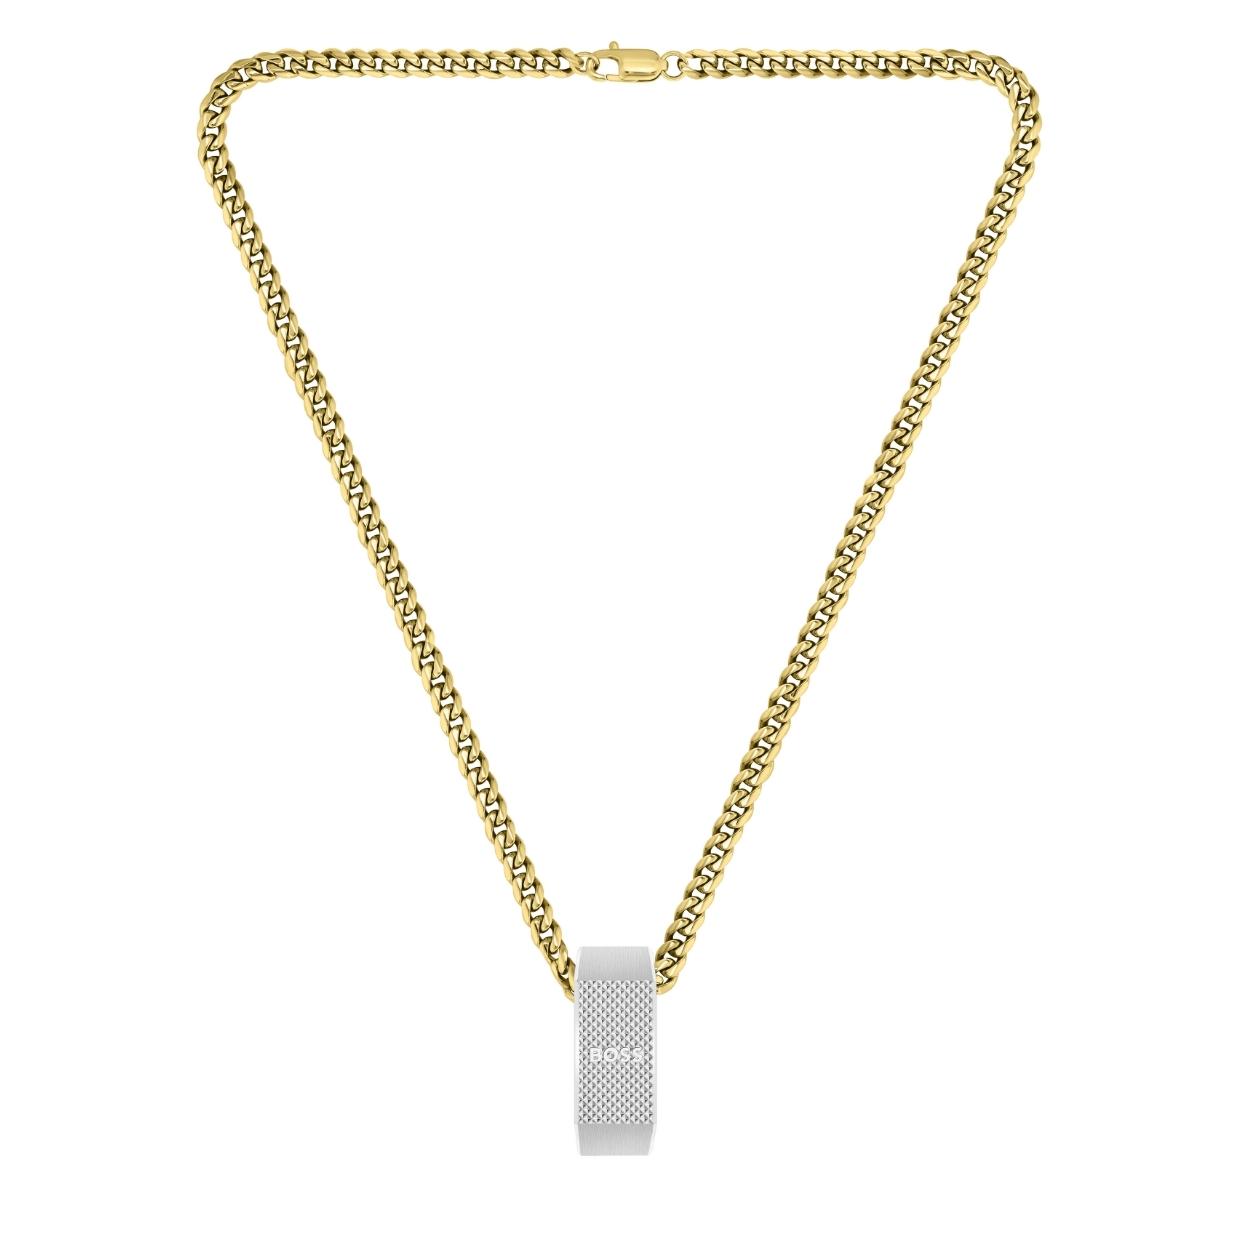 BOSS Gold/Silver Carter Reversible Pendent Necklace